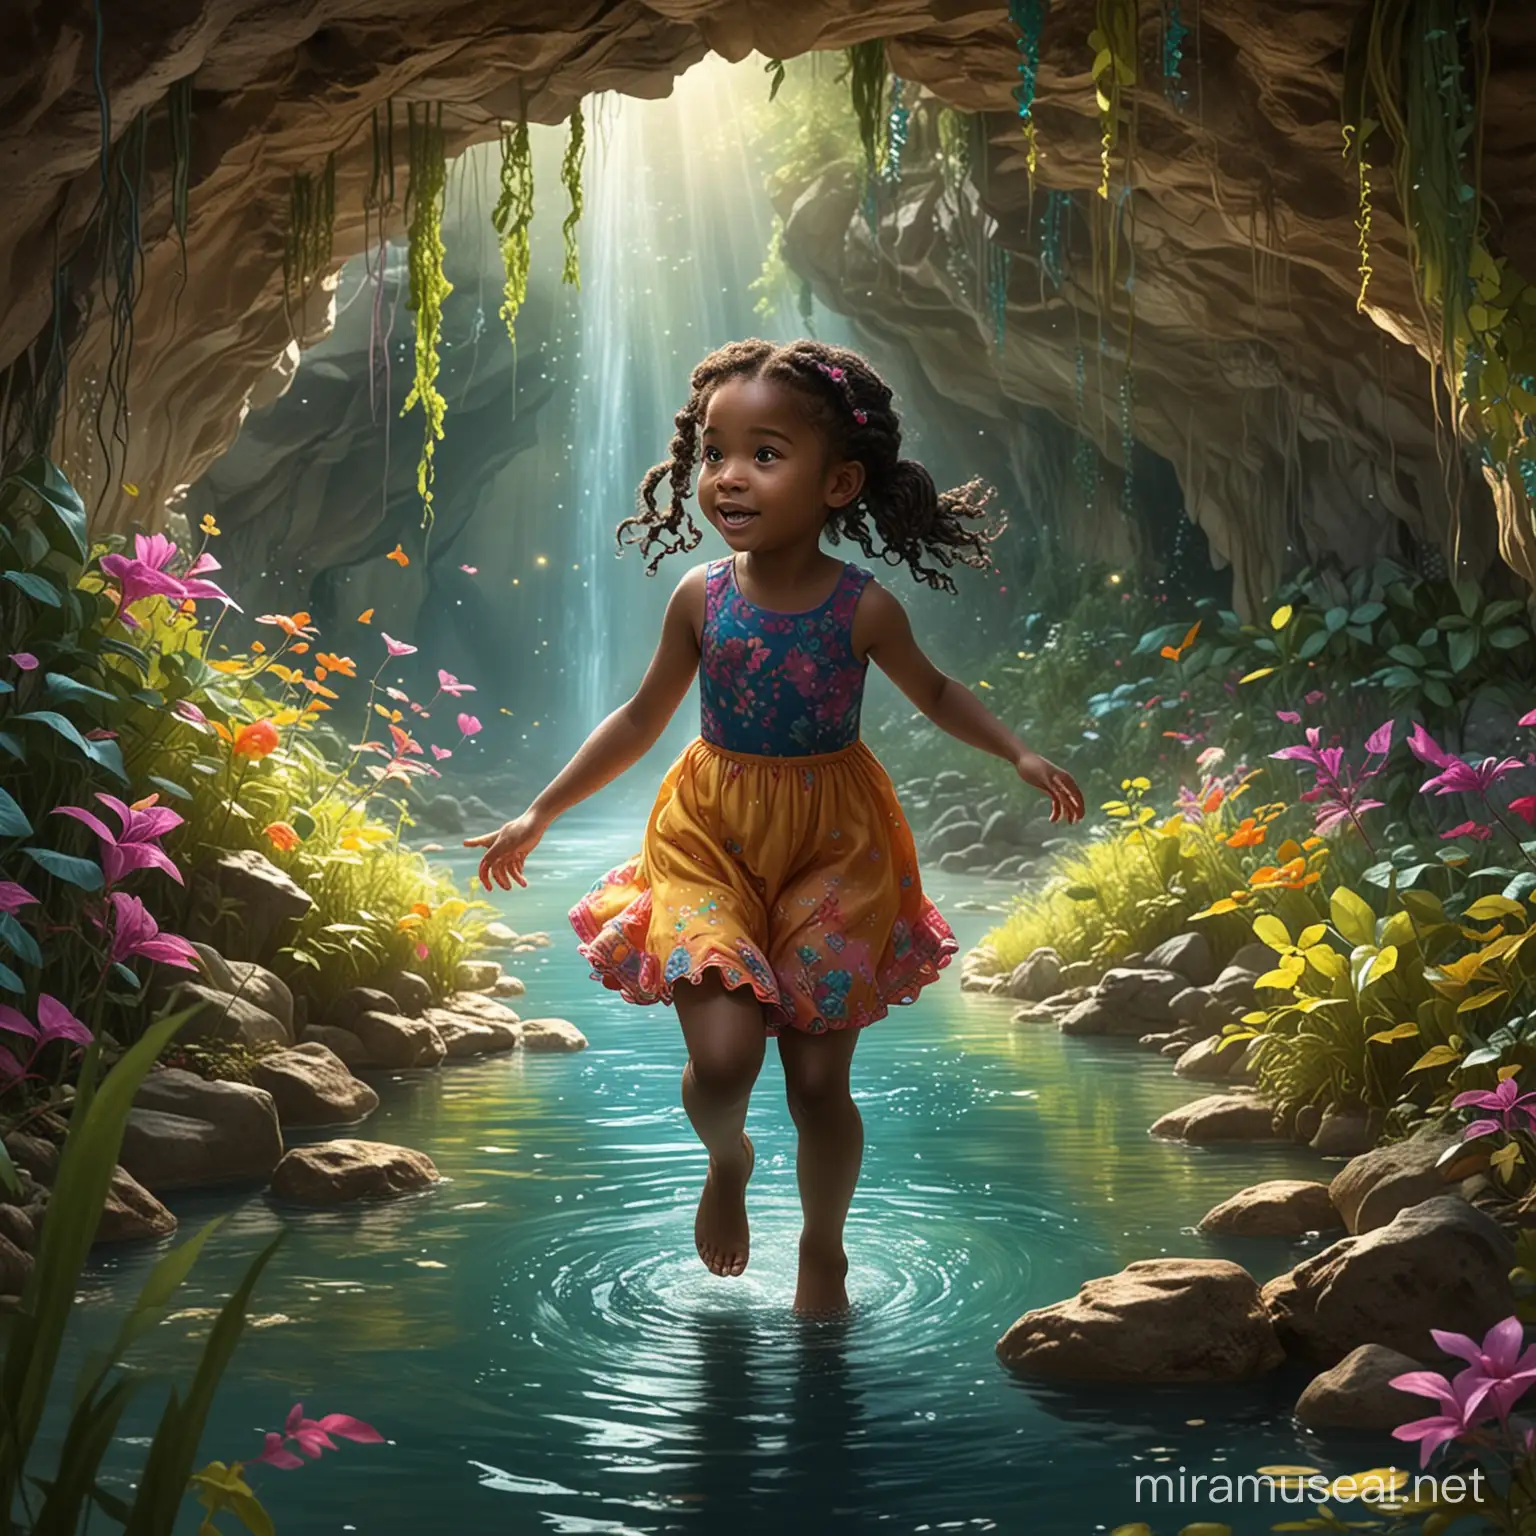 Playfully skipping and giggling, 5-year-old Jamaican Chinny bravely enters the hidden cave covered in colorful vines and sparkling with mystery, her pigtails bouncing with each step. Inside, she finds herself in awe of the dazzling lagoon glowing with colors she had never seen before in a stunning Digital illustration.